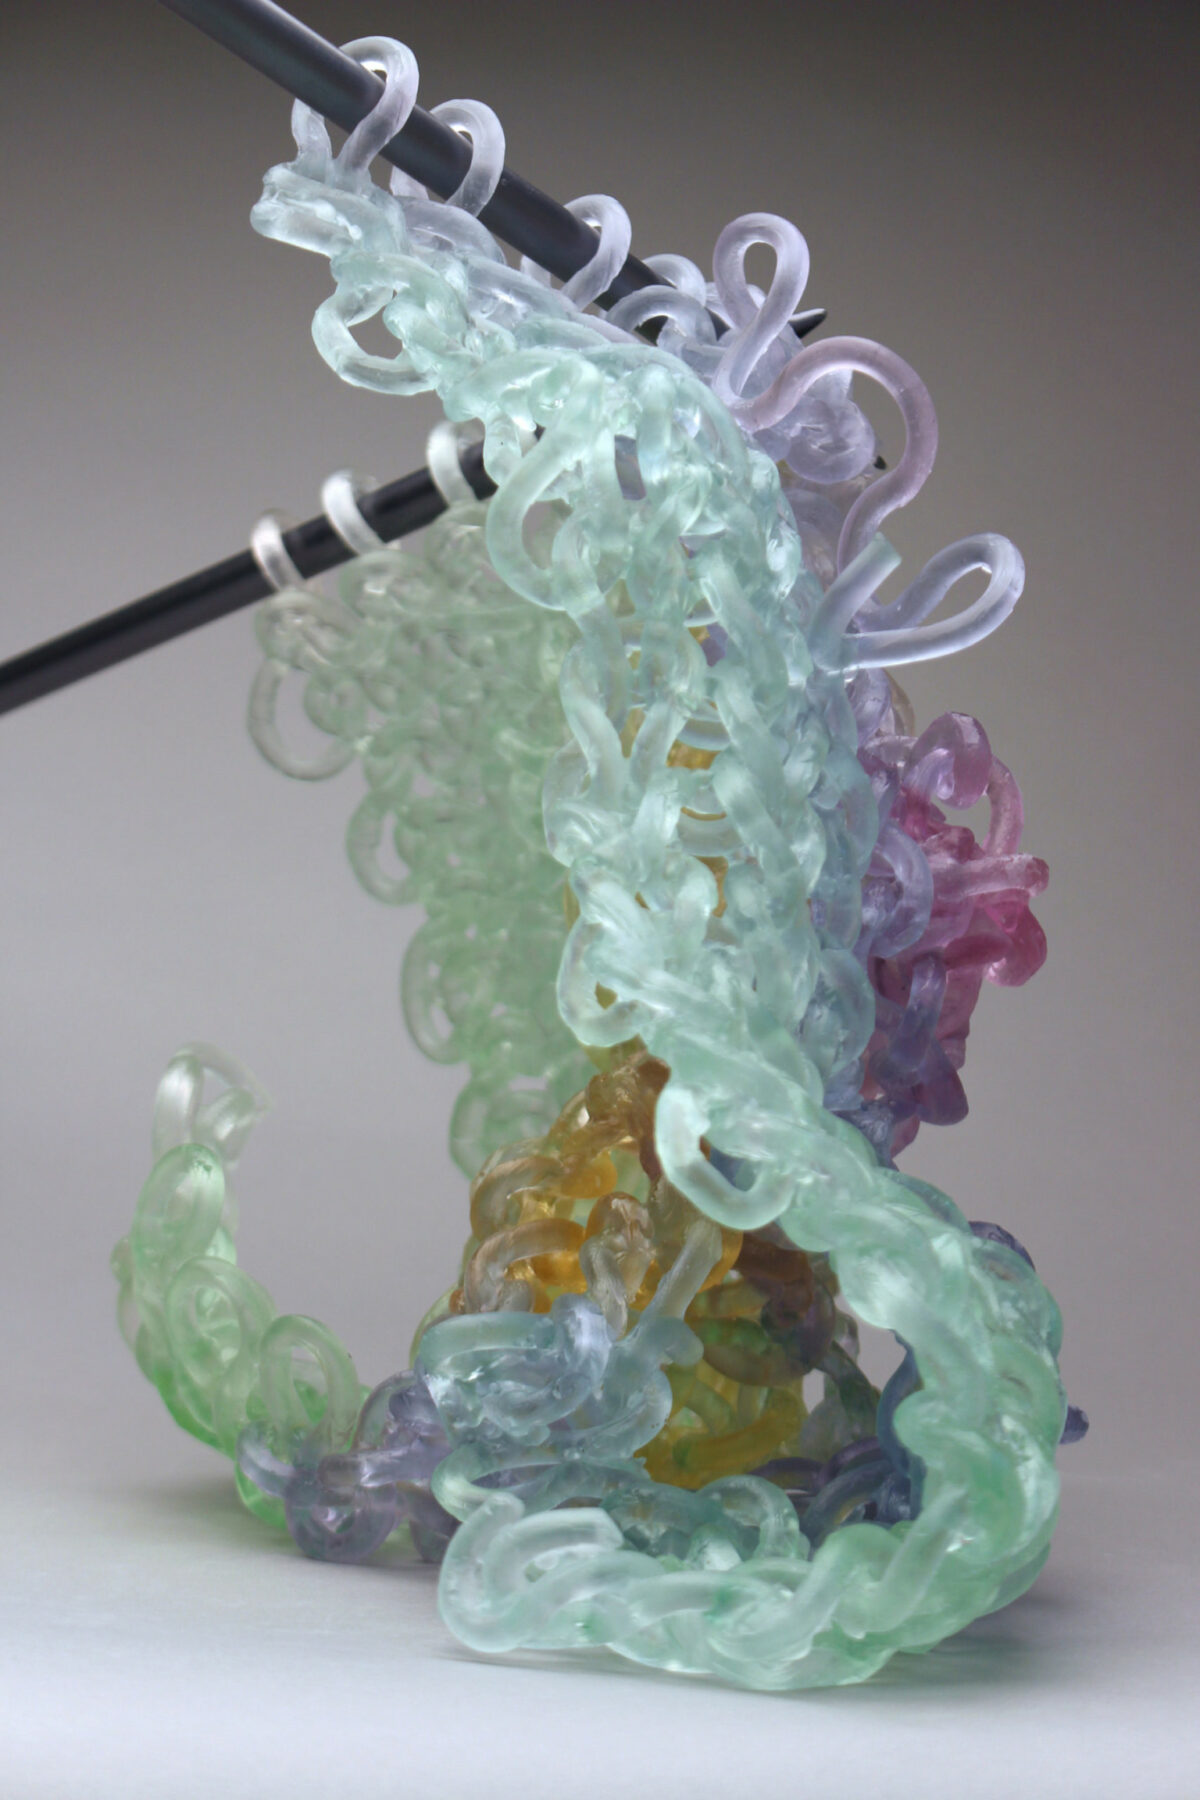 Knitted Glass, Fiber Inspired Sculptures By Carol Milne (16)